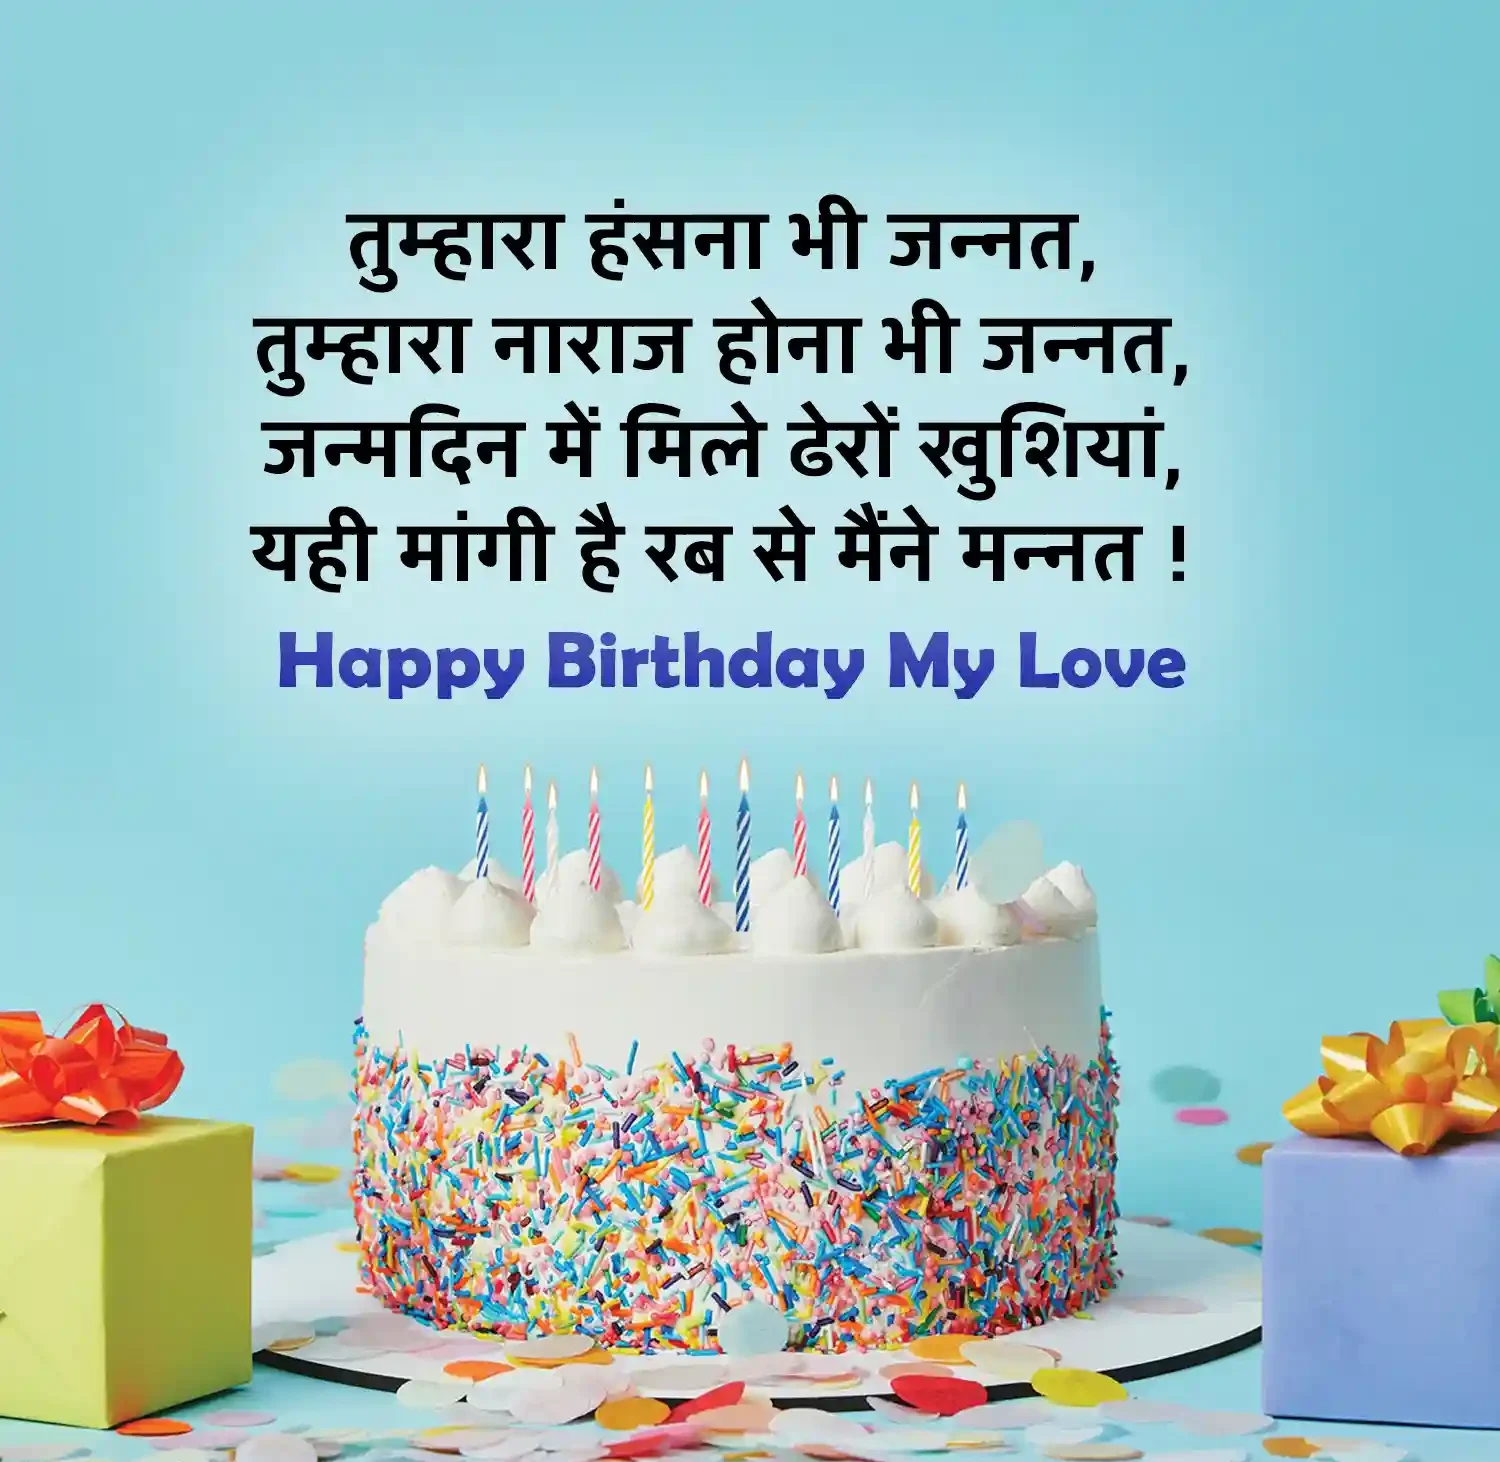 Happy Birthday Wishes for Wife Hindi